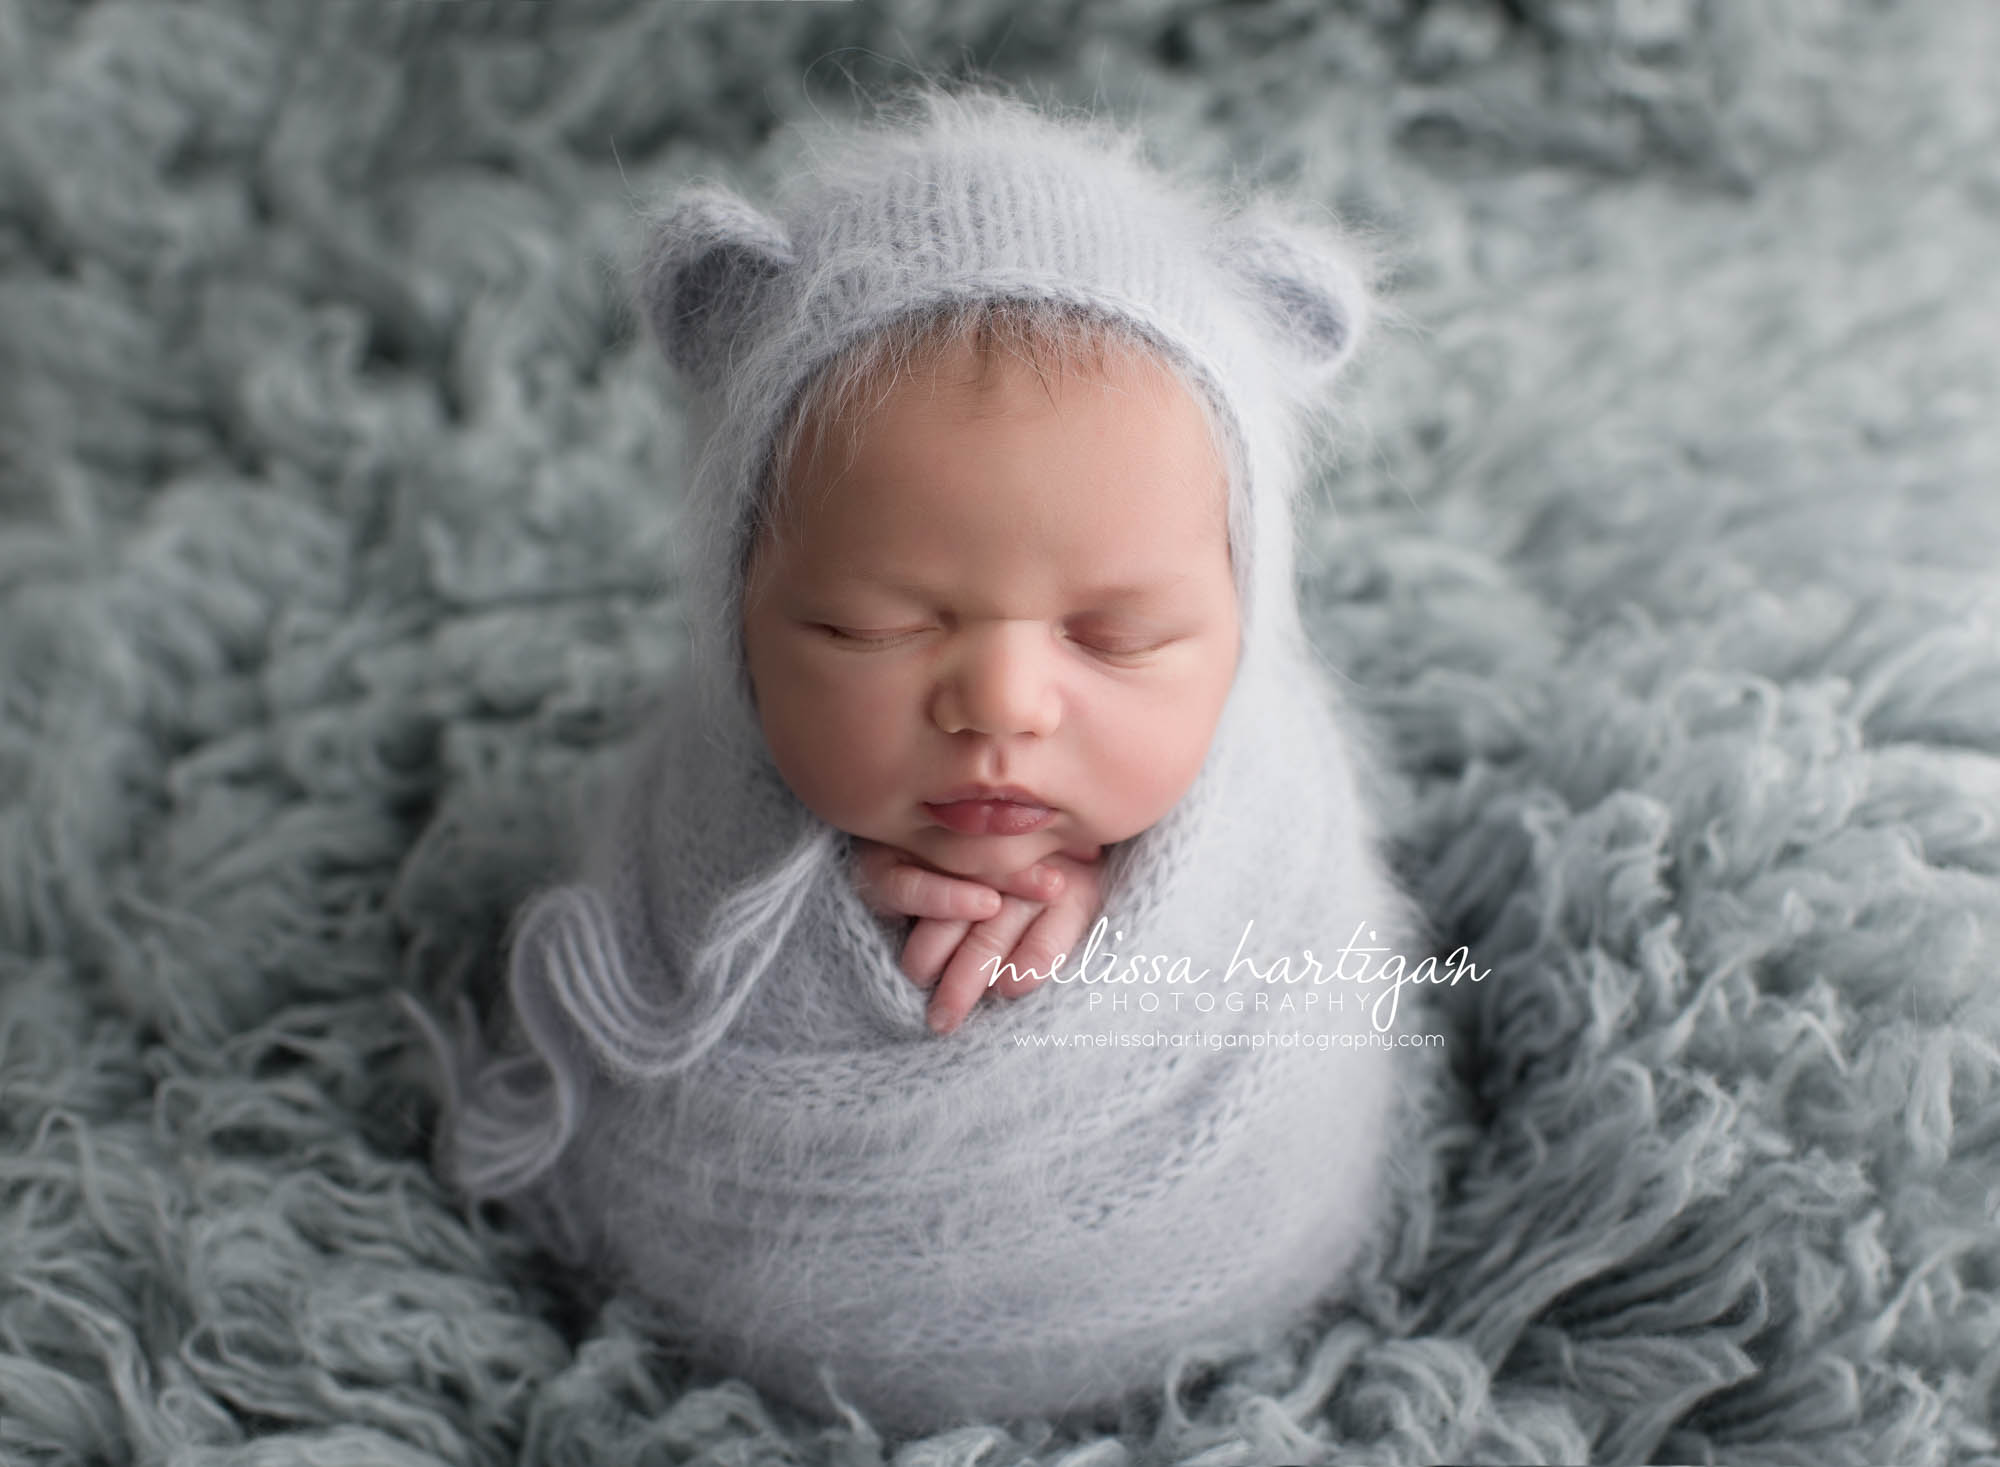 Melissa Hartigan Photography Coventry CT Simply Swaddled Newborn Session baby boy wrapped in pale blue knit with matching earred hat on blue flokati